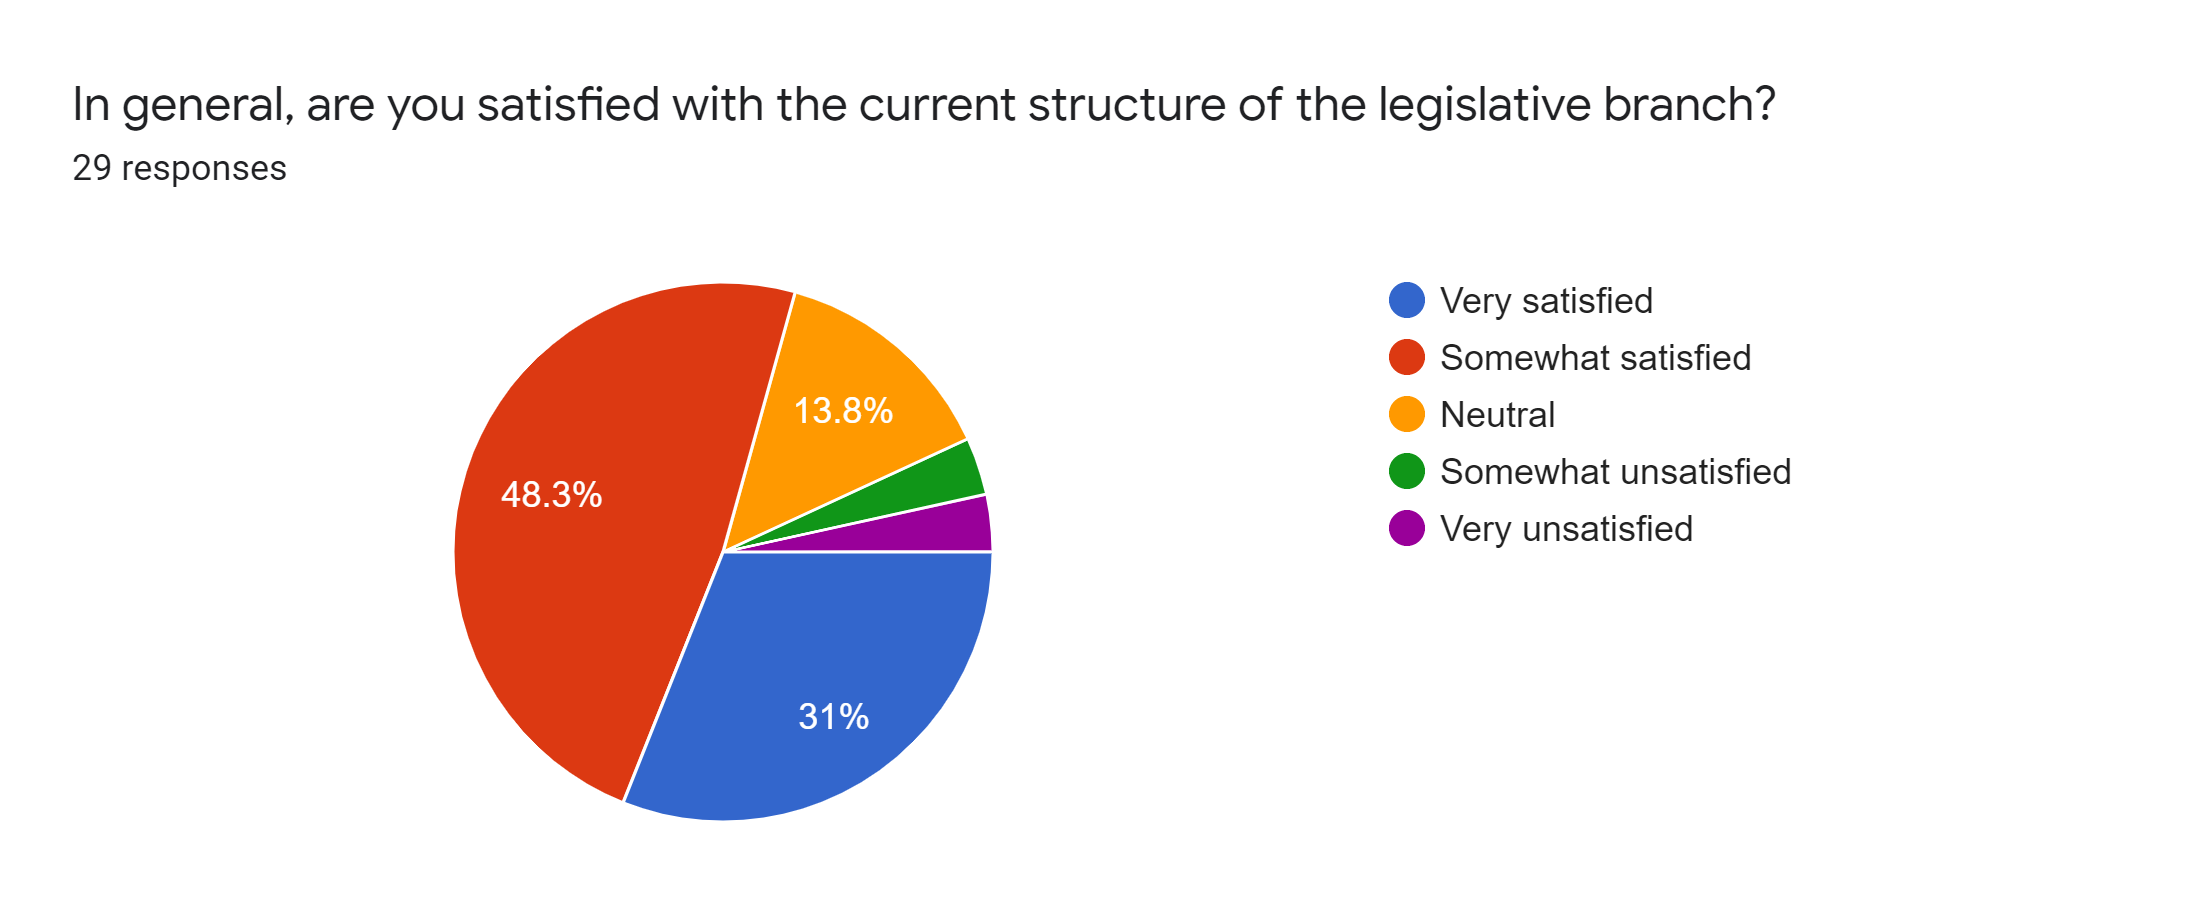 Forms response chart. Question title: In general, are you satisfied with the current structure of the legislative branch?. Number of responses: 29 responses.